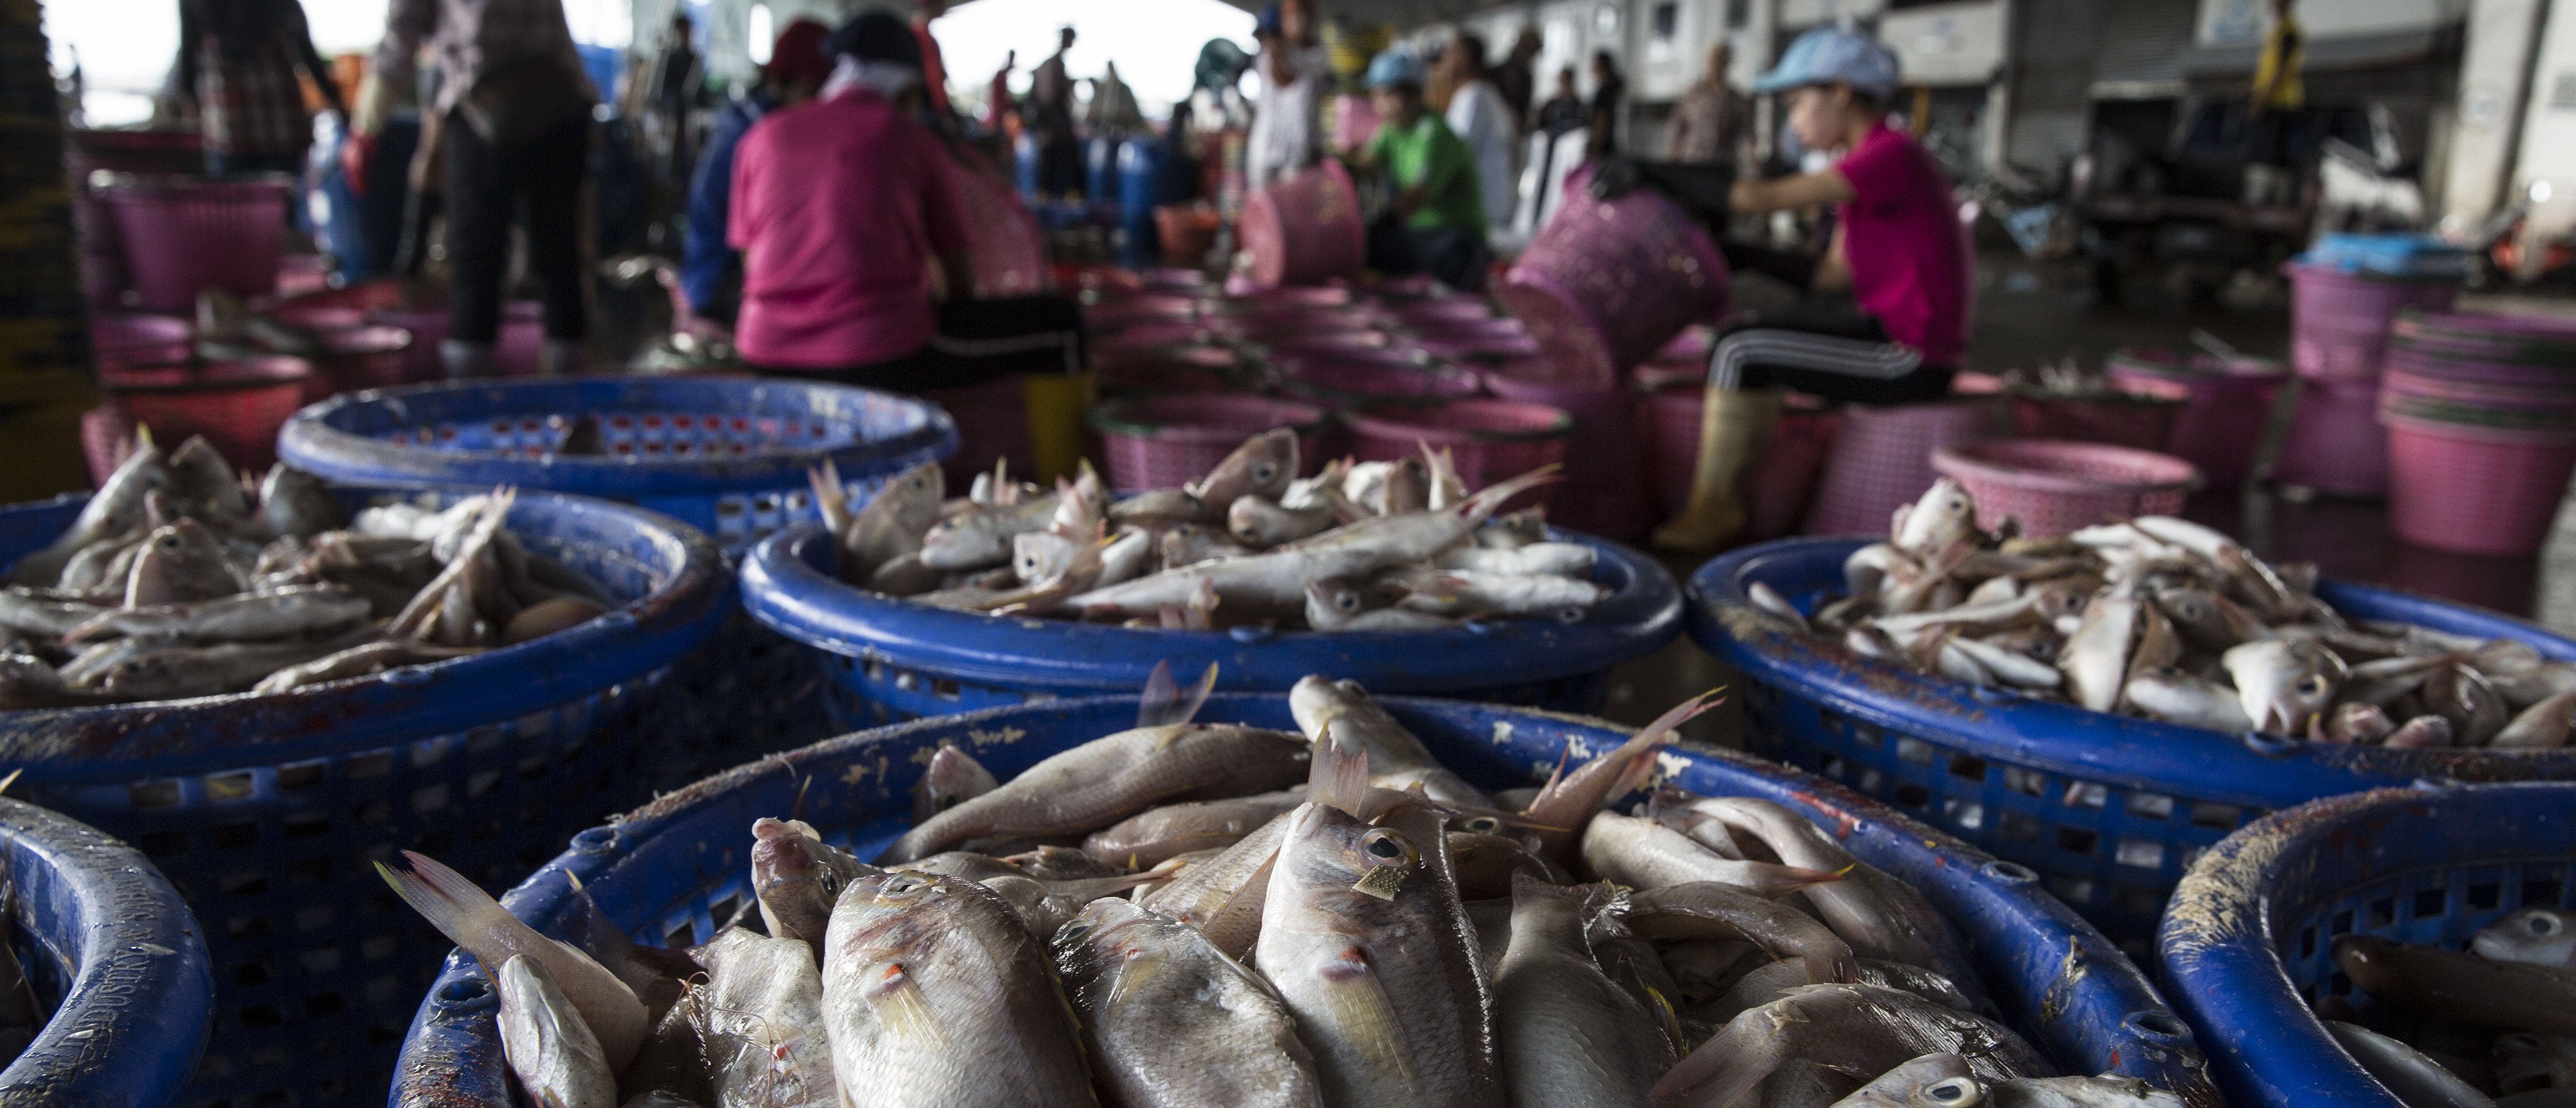 SONGKHLA, THAILAND - FEBRUARY 1: Fresh fish is ready to be sorted after it was unloaded from a fishing boat at the port in Songkhla on February 1, 2016. Around 100 people have been arrested by authorities in a recent crackdown on abuses involving Thailand's multi-billion dollar seafood industry. The deep-rooted problem caused the huge global brand, Nestle in 2015 to admit that it had discovered clear evidence of slavery at sea in parts of the Thai supply chain. Thailand is the world's third largest exporter of seafood. (Photo by Paula Bronstein/ Getty Images )